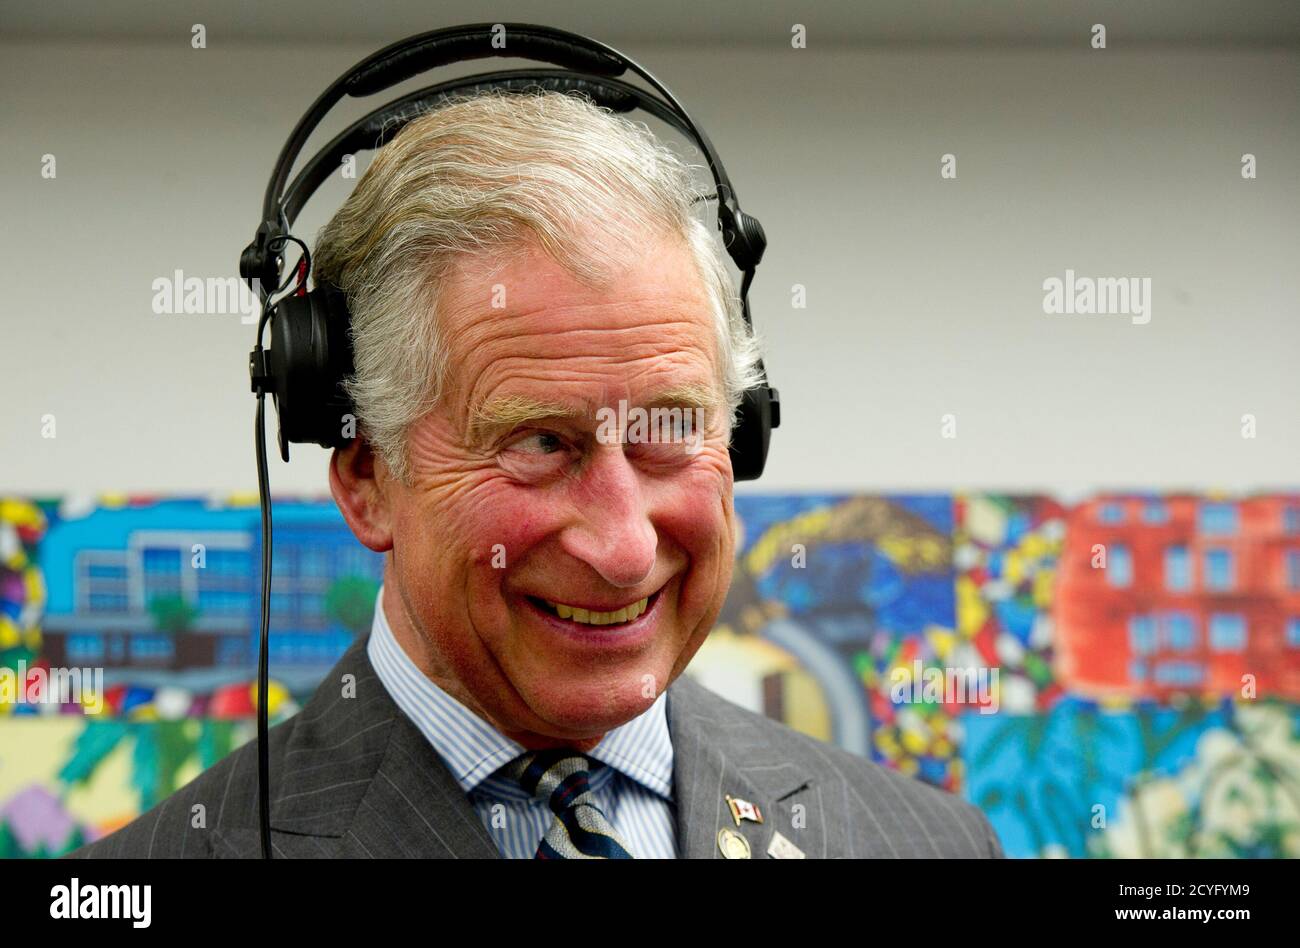 Prince Charles wears headphones as learns how to scratch and fade with a  turntable while he tours an employment skills workshop in Toronto May 22,  2012. The royal couple is on a